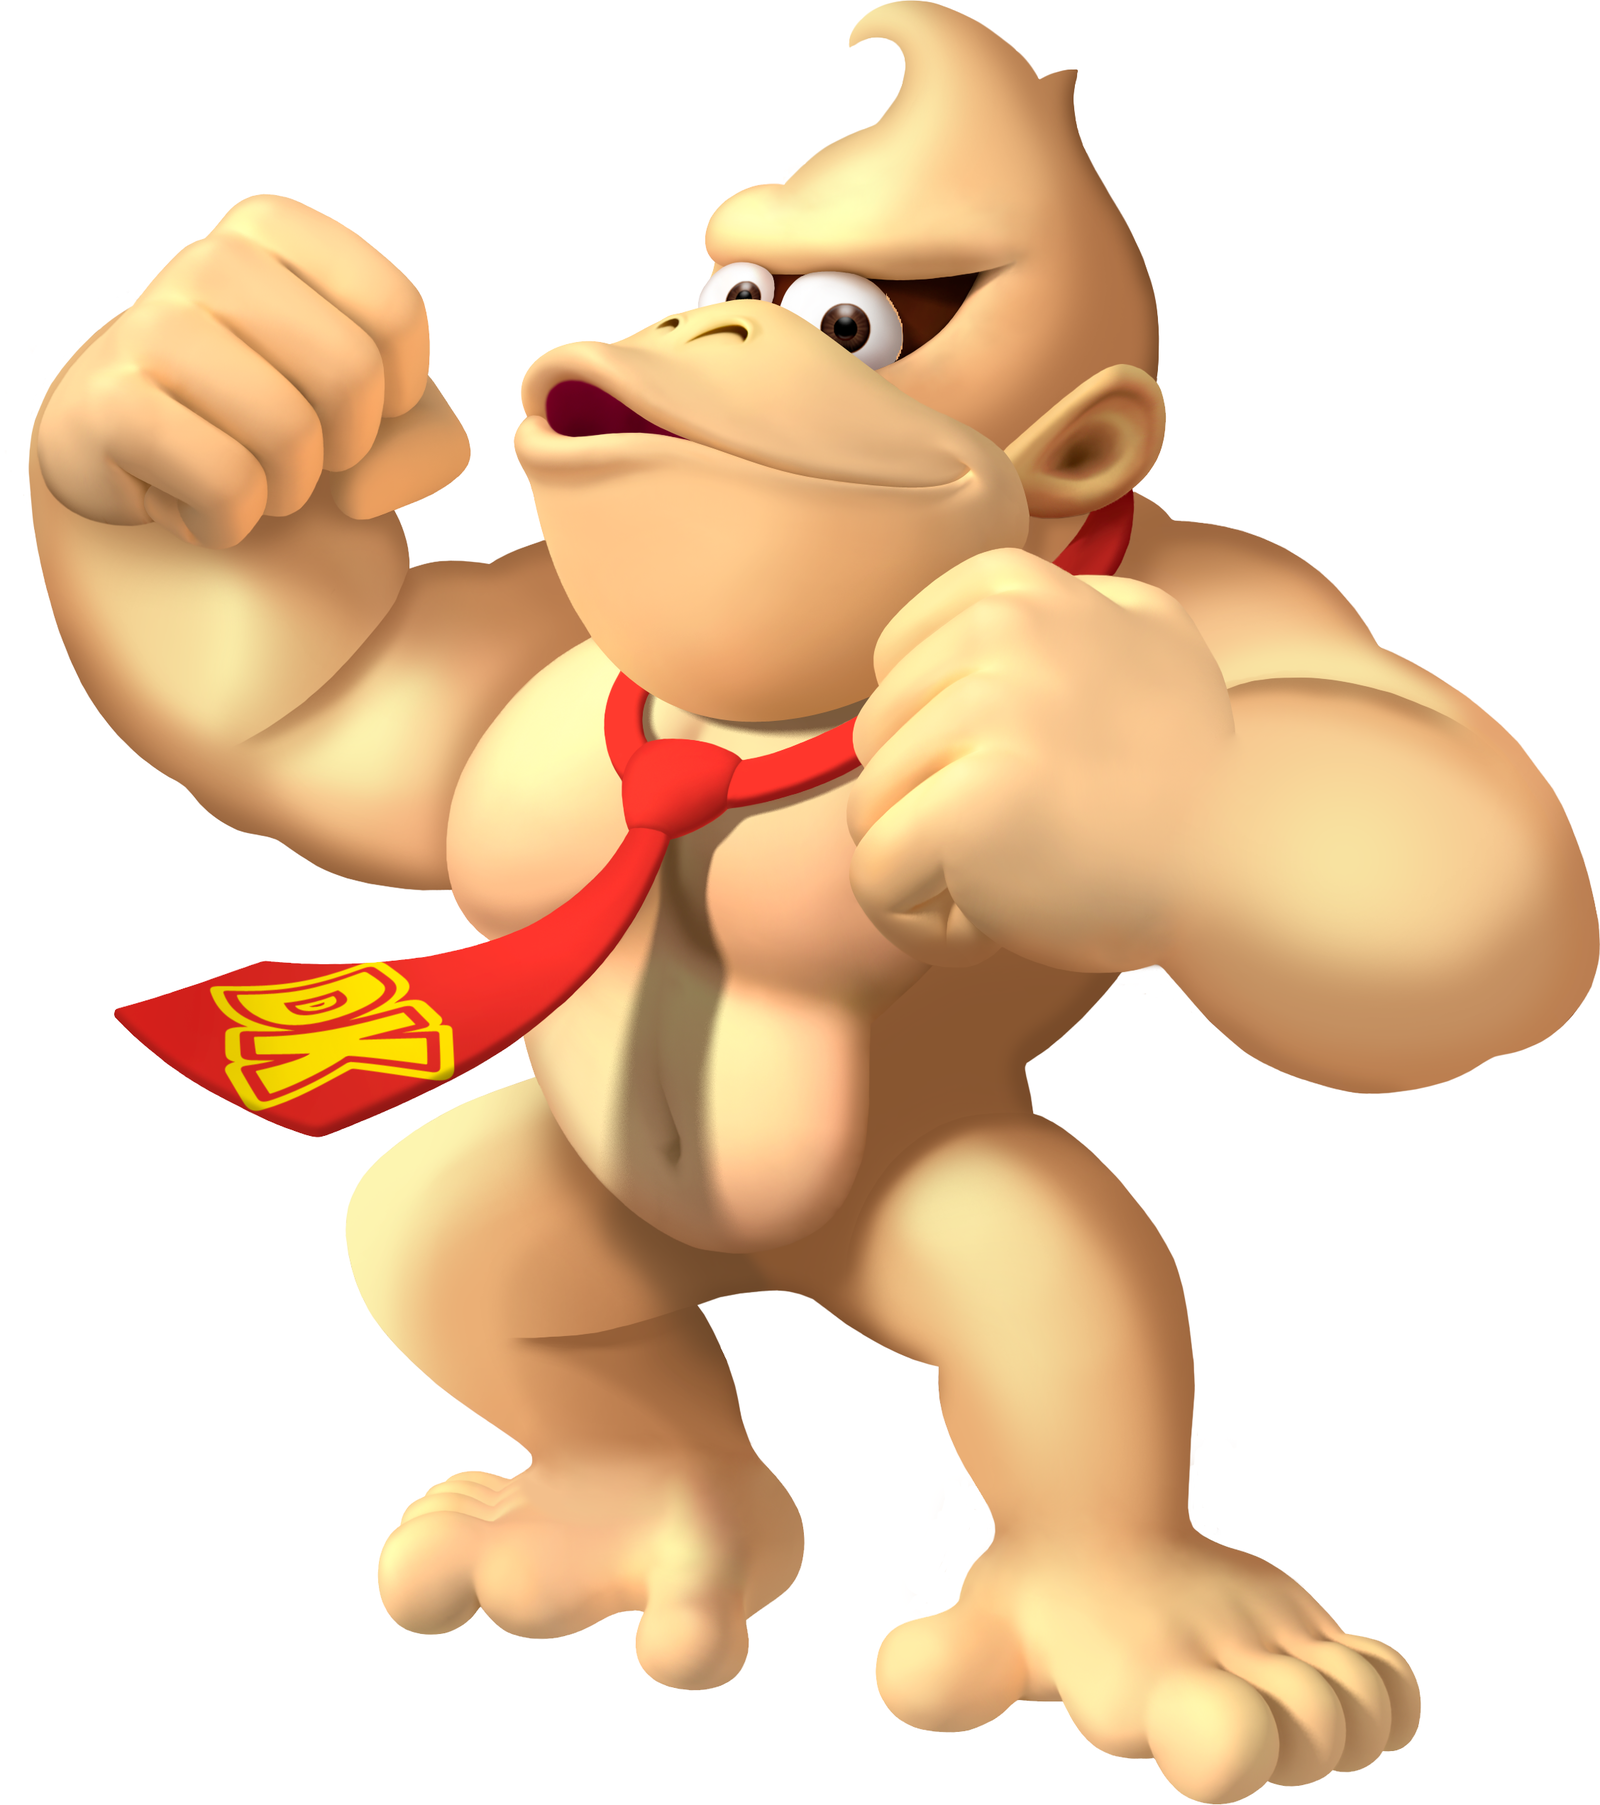 So why not a hairless Donkey Kong? 